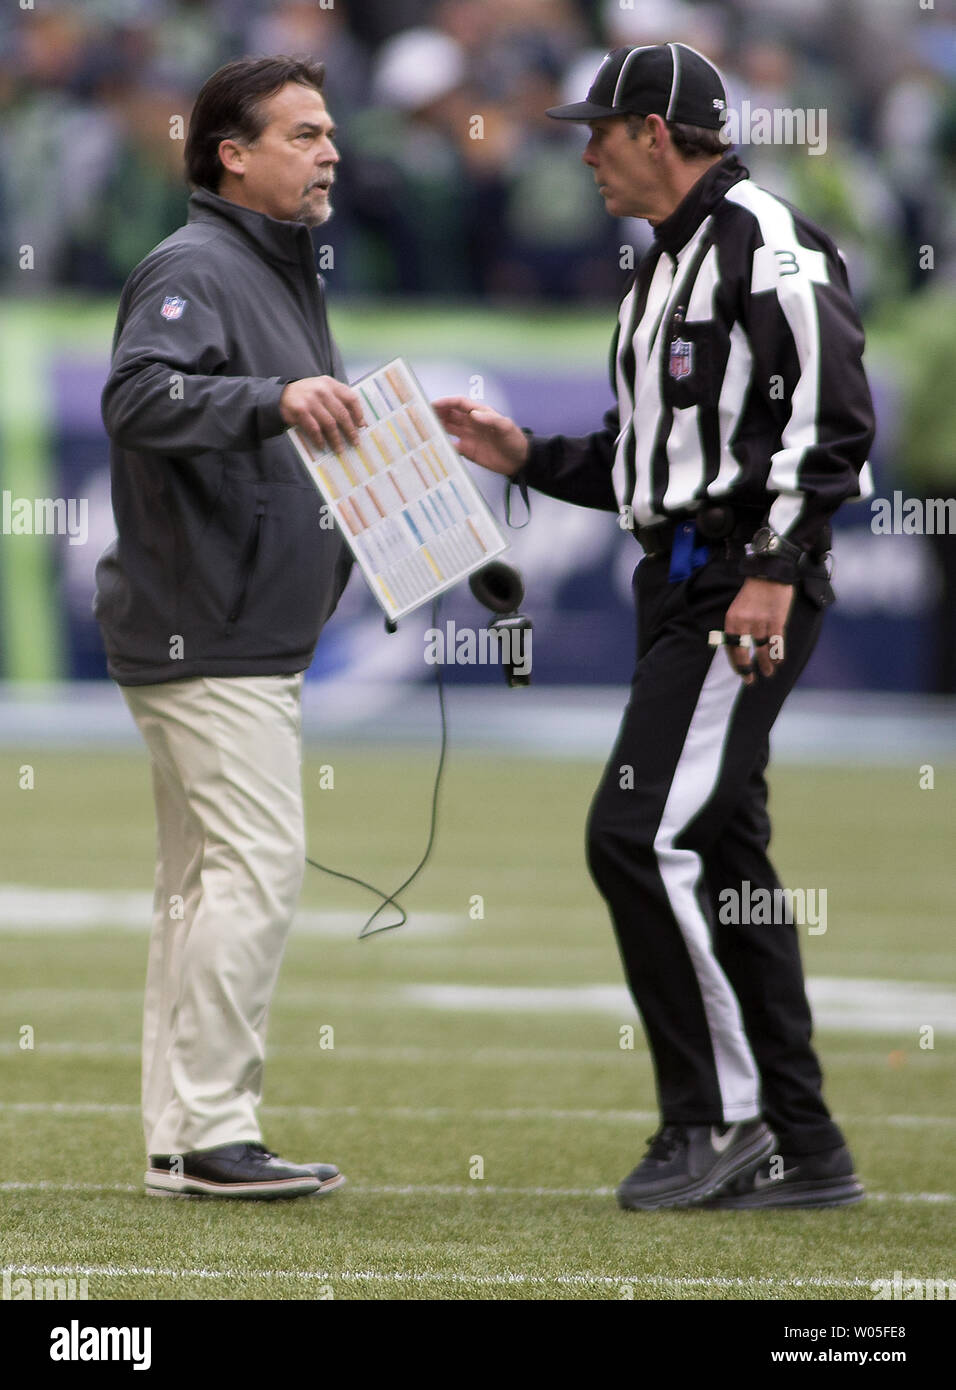 St. Louis Rams head coach Jeff Fisher questions side judge Scott Edwards (3) over ball placement in the second quarter at CenturyLink Field in Seattle, Washington on December 28, 2014.  The Seattle Seahawks beat the St. Louis Rams 20-6.   UPI/Jim Bryant Stock Photo